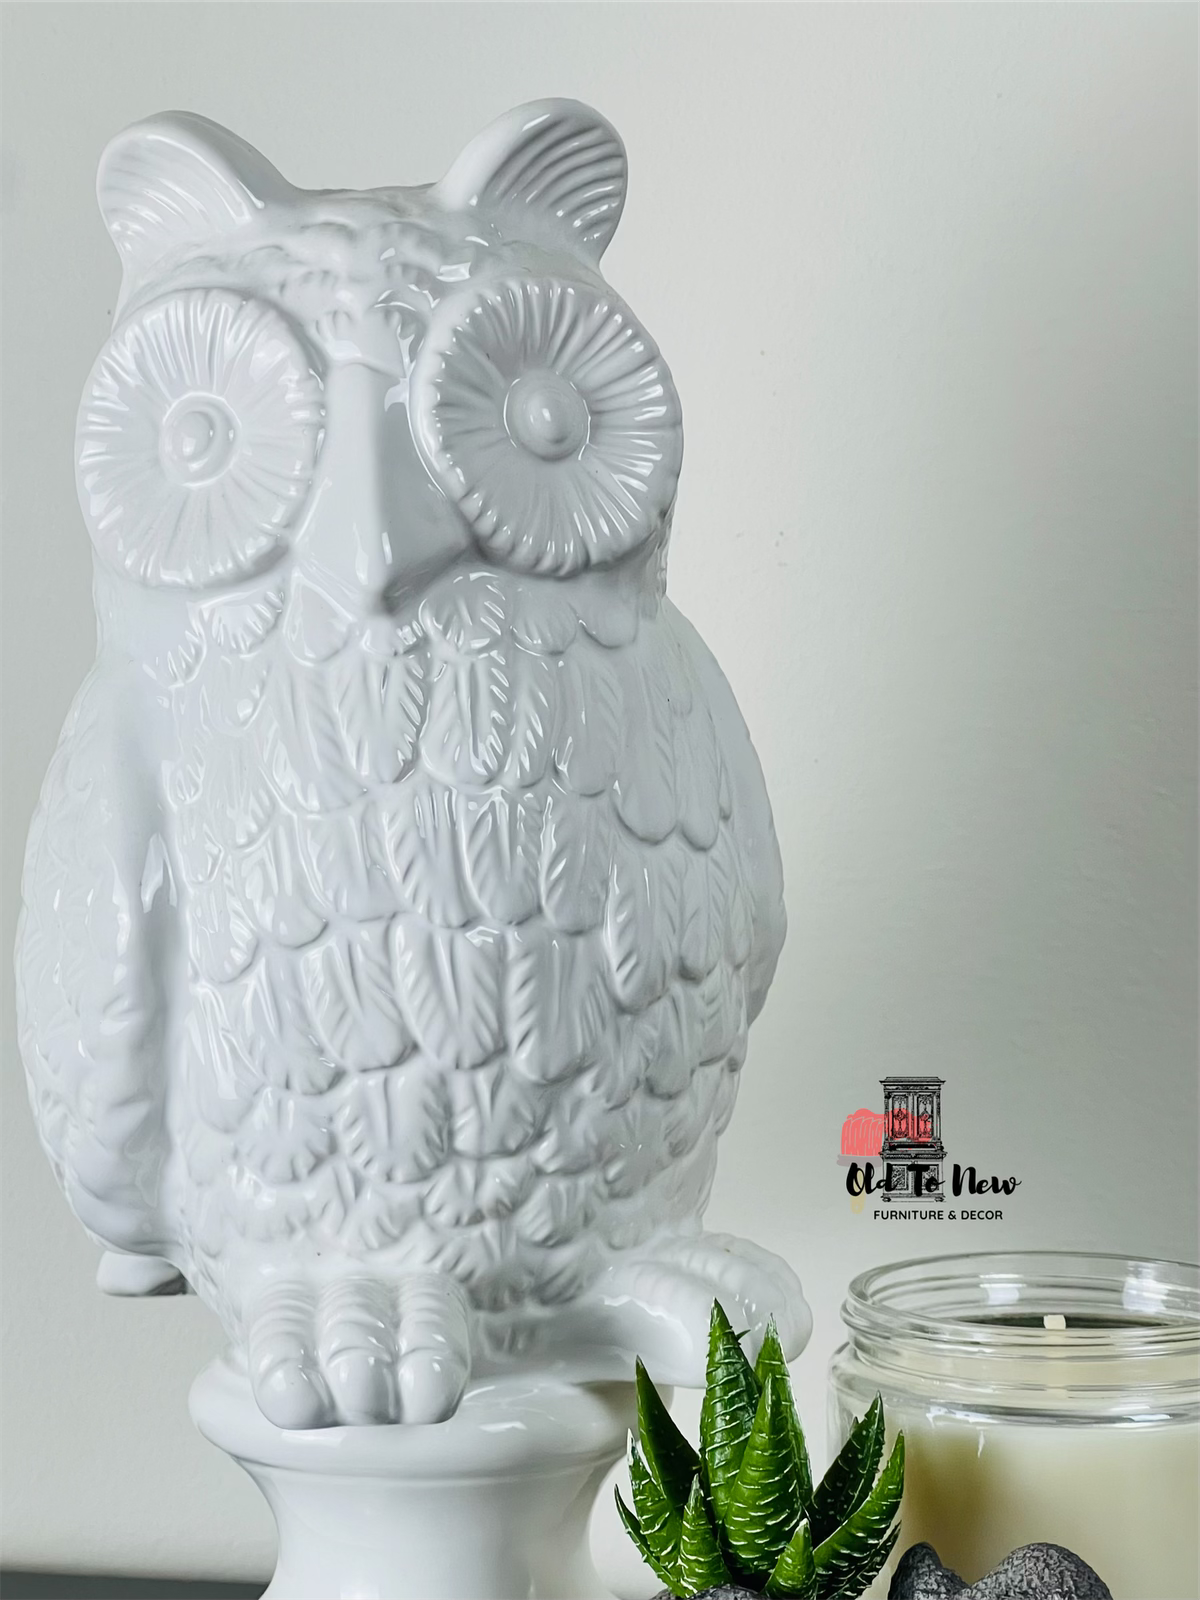  Naturist Home Decor, White Owl Home Accent, Old to New Furniture and Decor